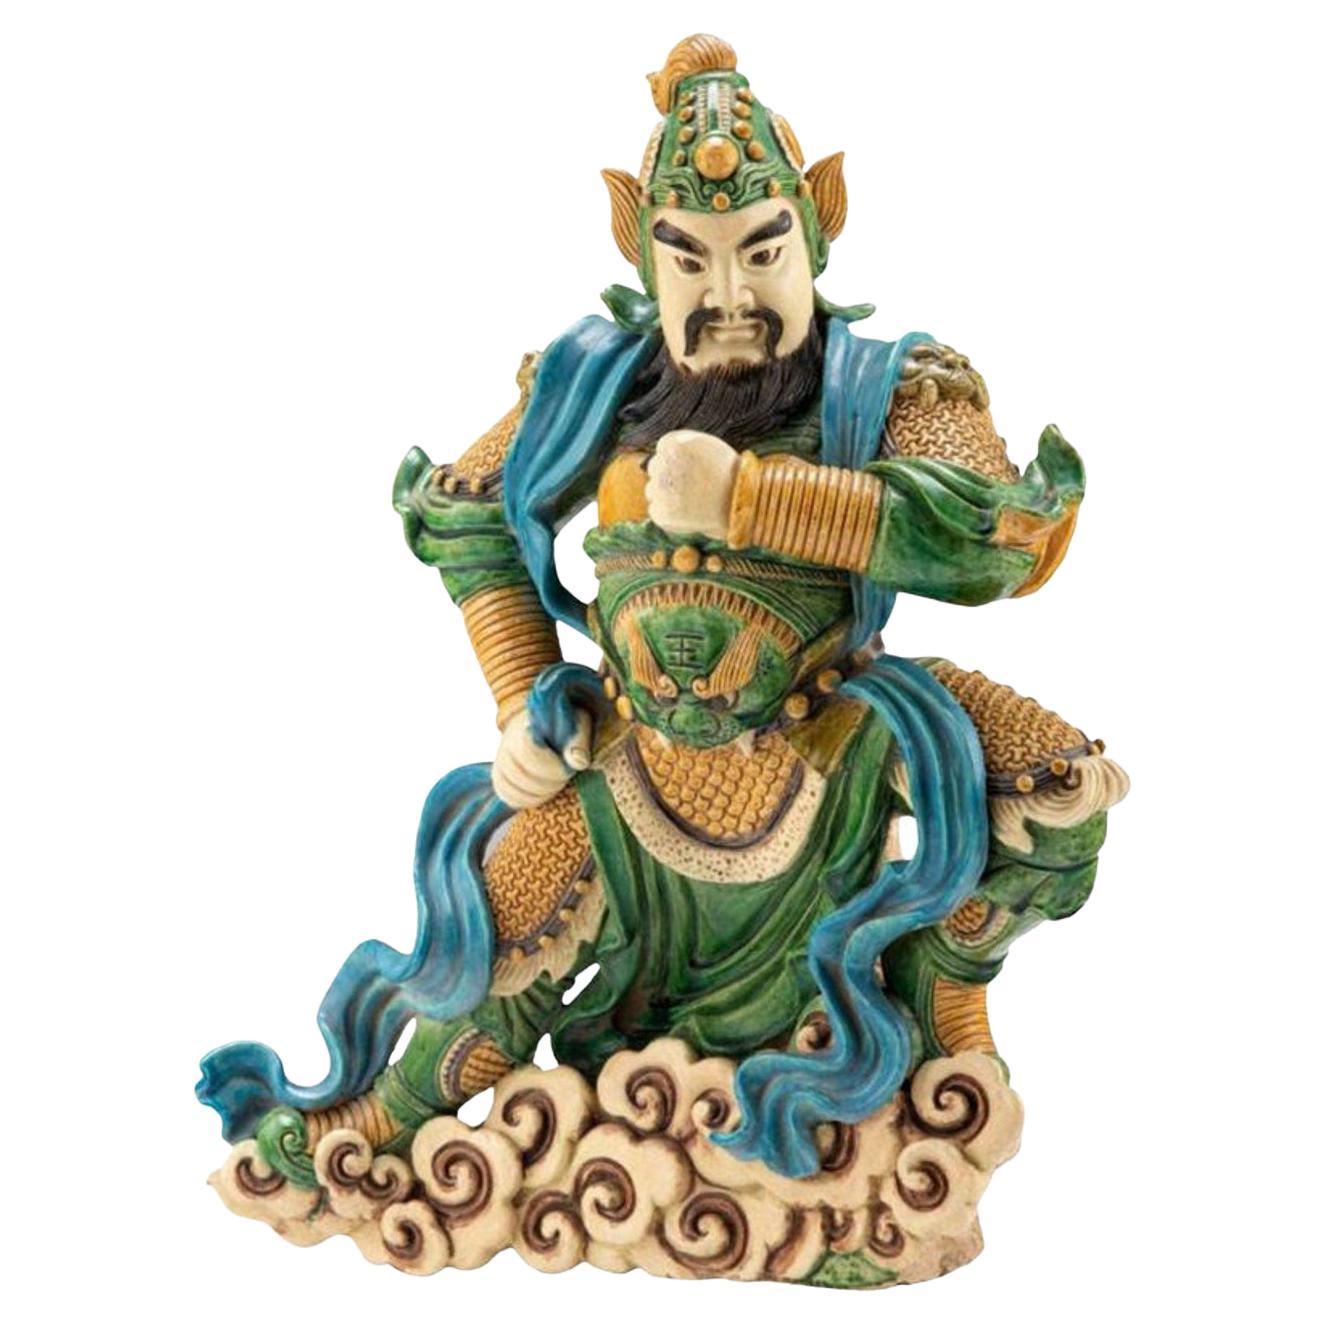 Qing Dynasty Chinese Sancai Temple Guardian Figure